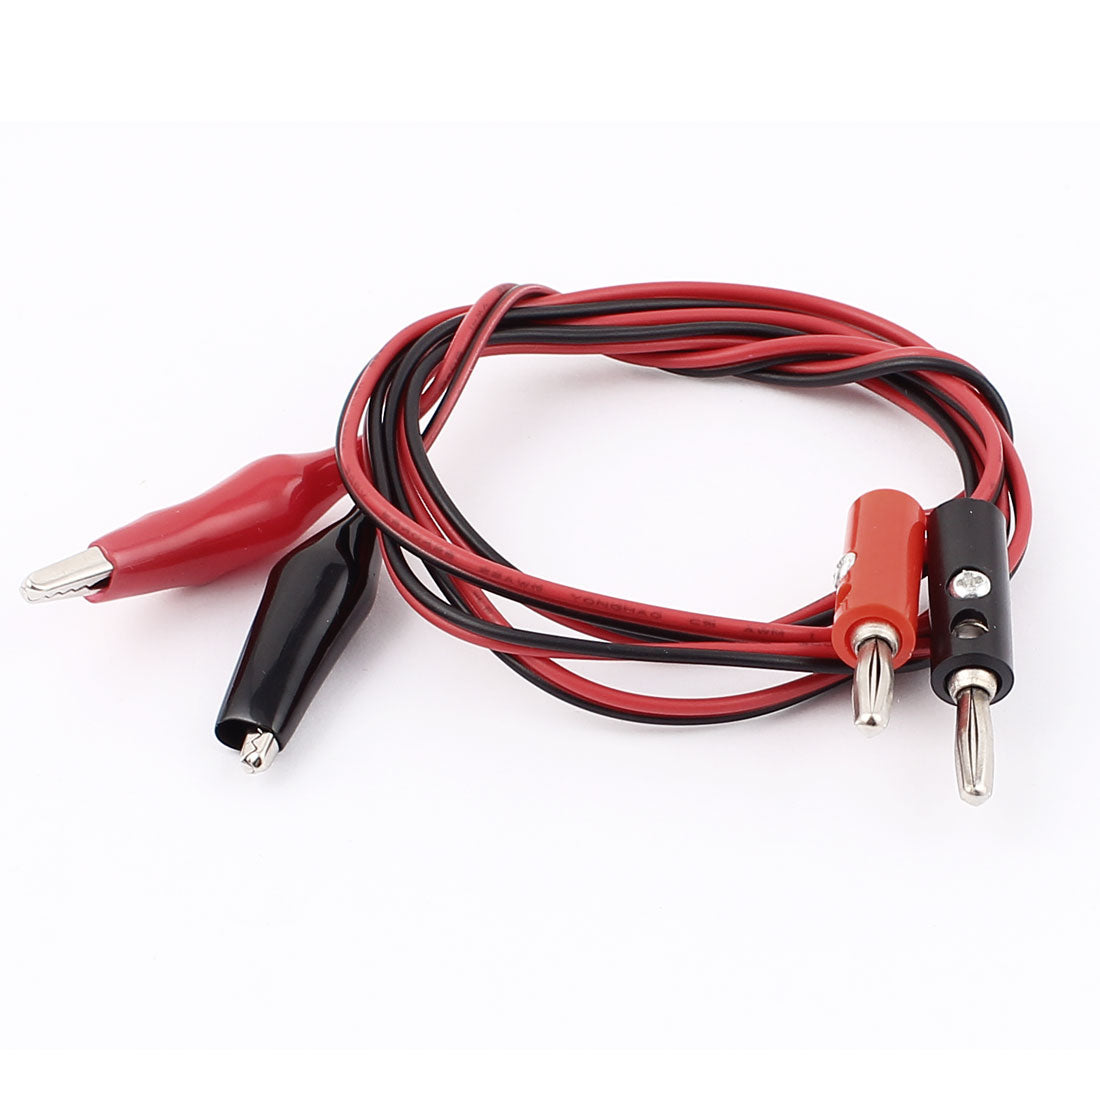 uxcell Uxcell Multimeter Meter Alligator Test Lead Clip to 4mm Banana Connector Probe Cable Cord 1Meter Length